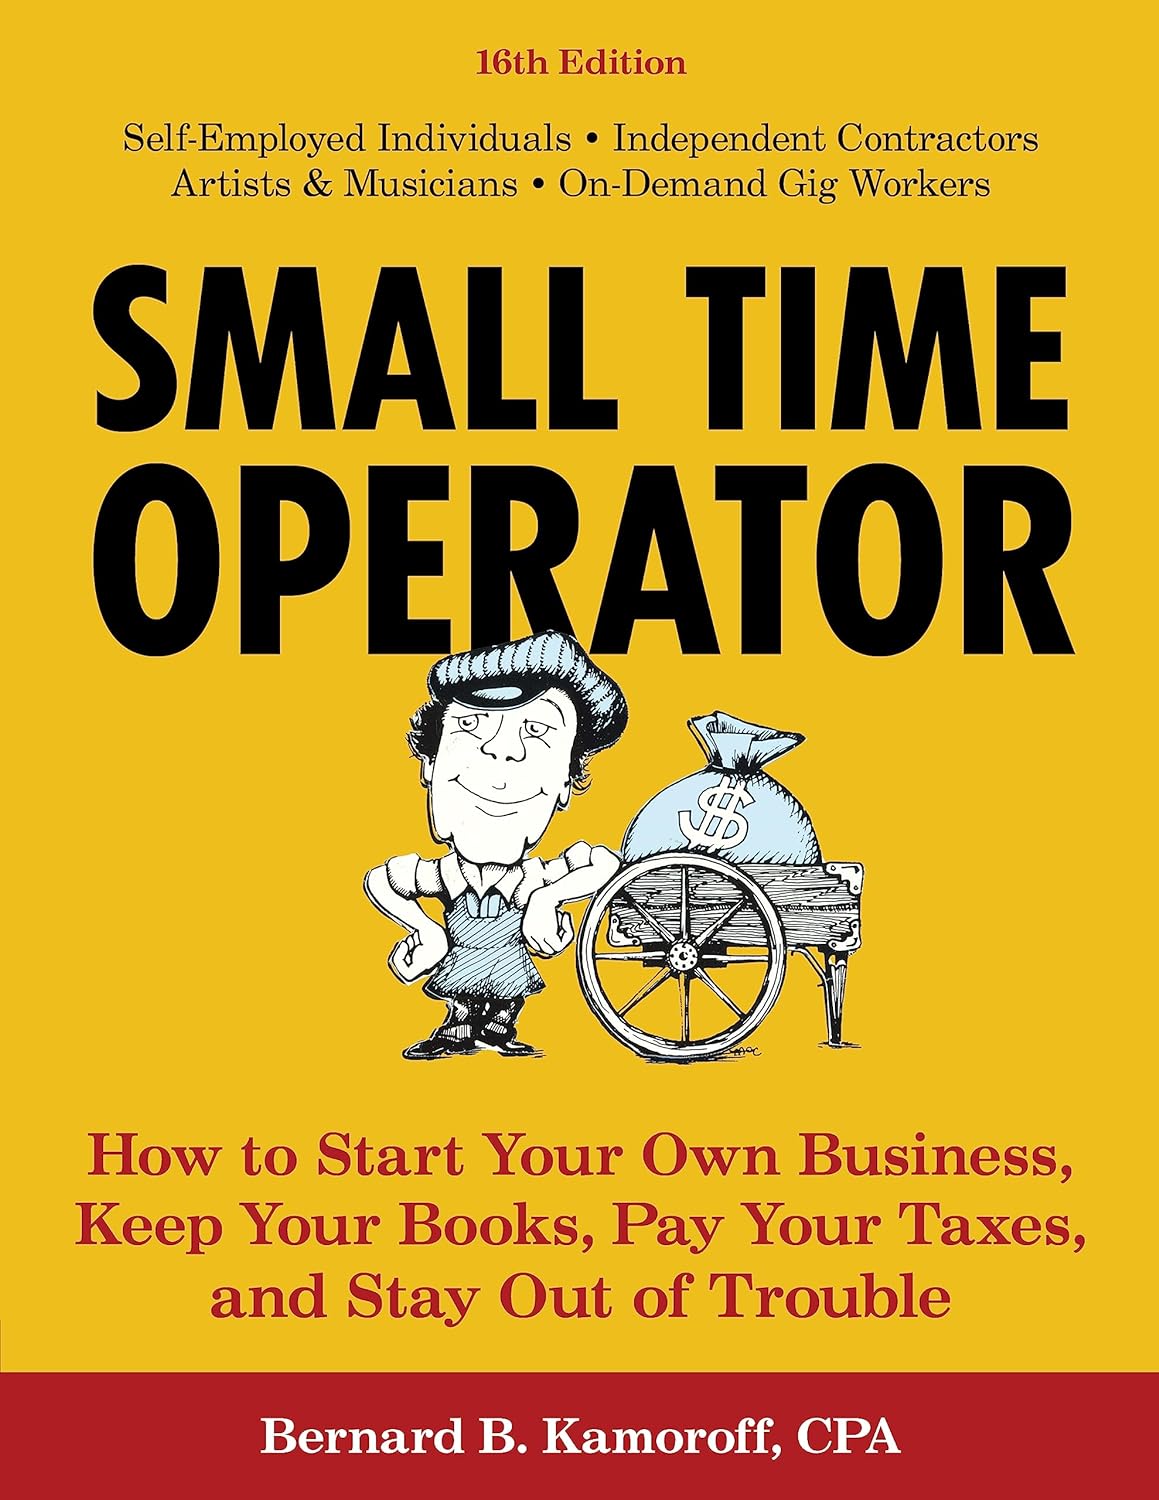 Small Time Operator How to Start Your Own Business, Keep Your Books, Pay Your Taxes, and Stay Out of Trouble (16th ed.) - SureShot Books Publishing LLC